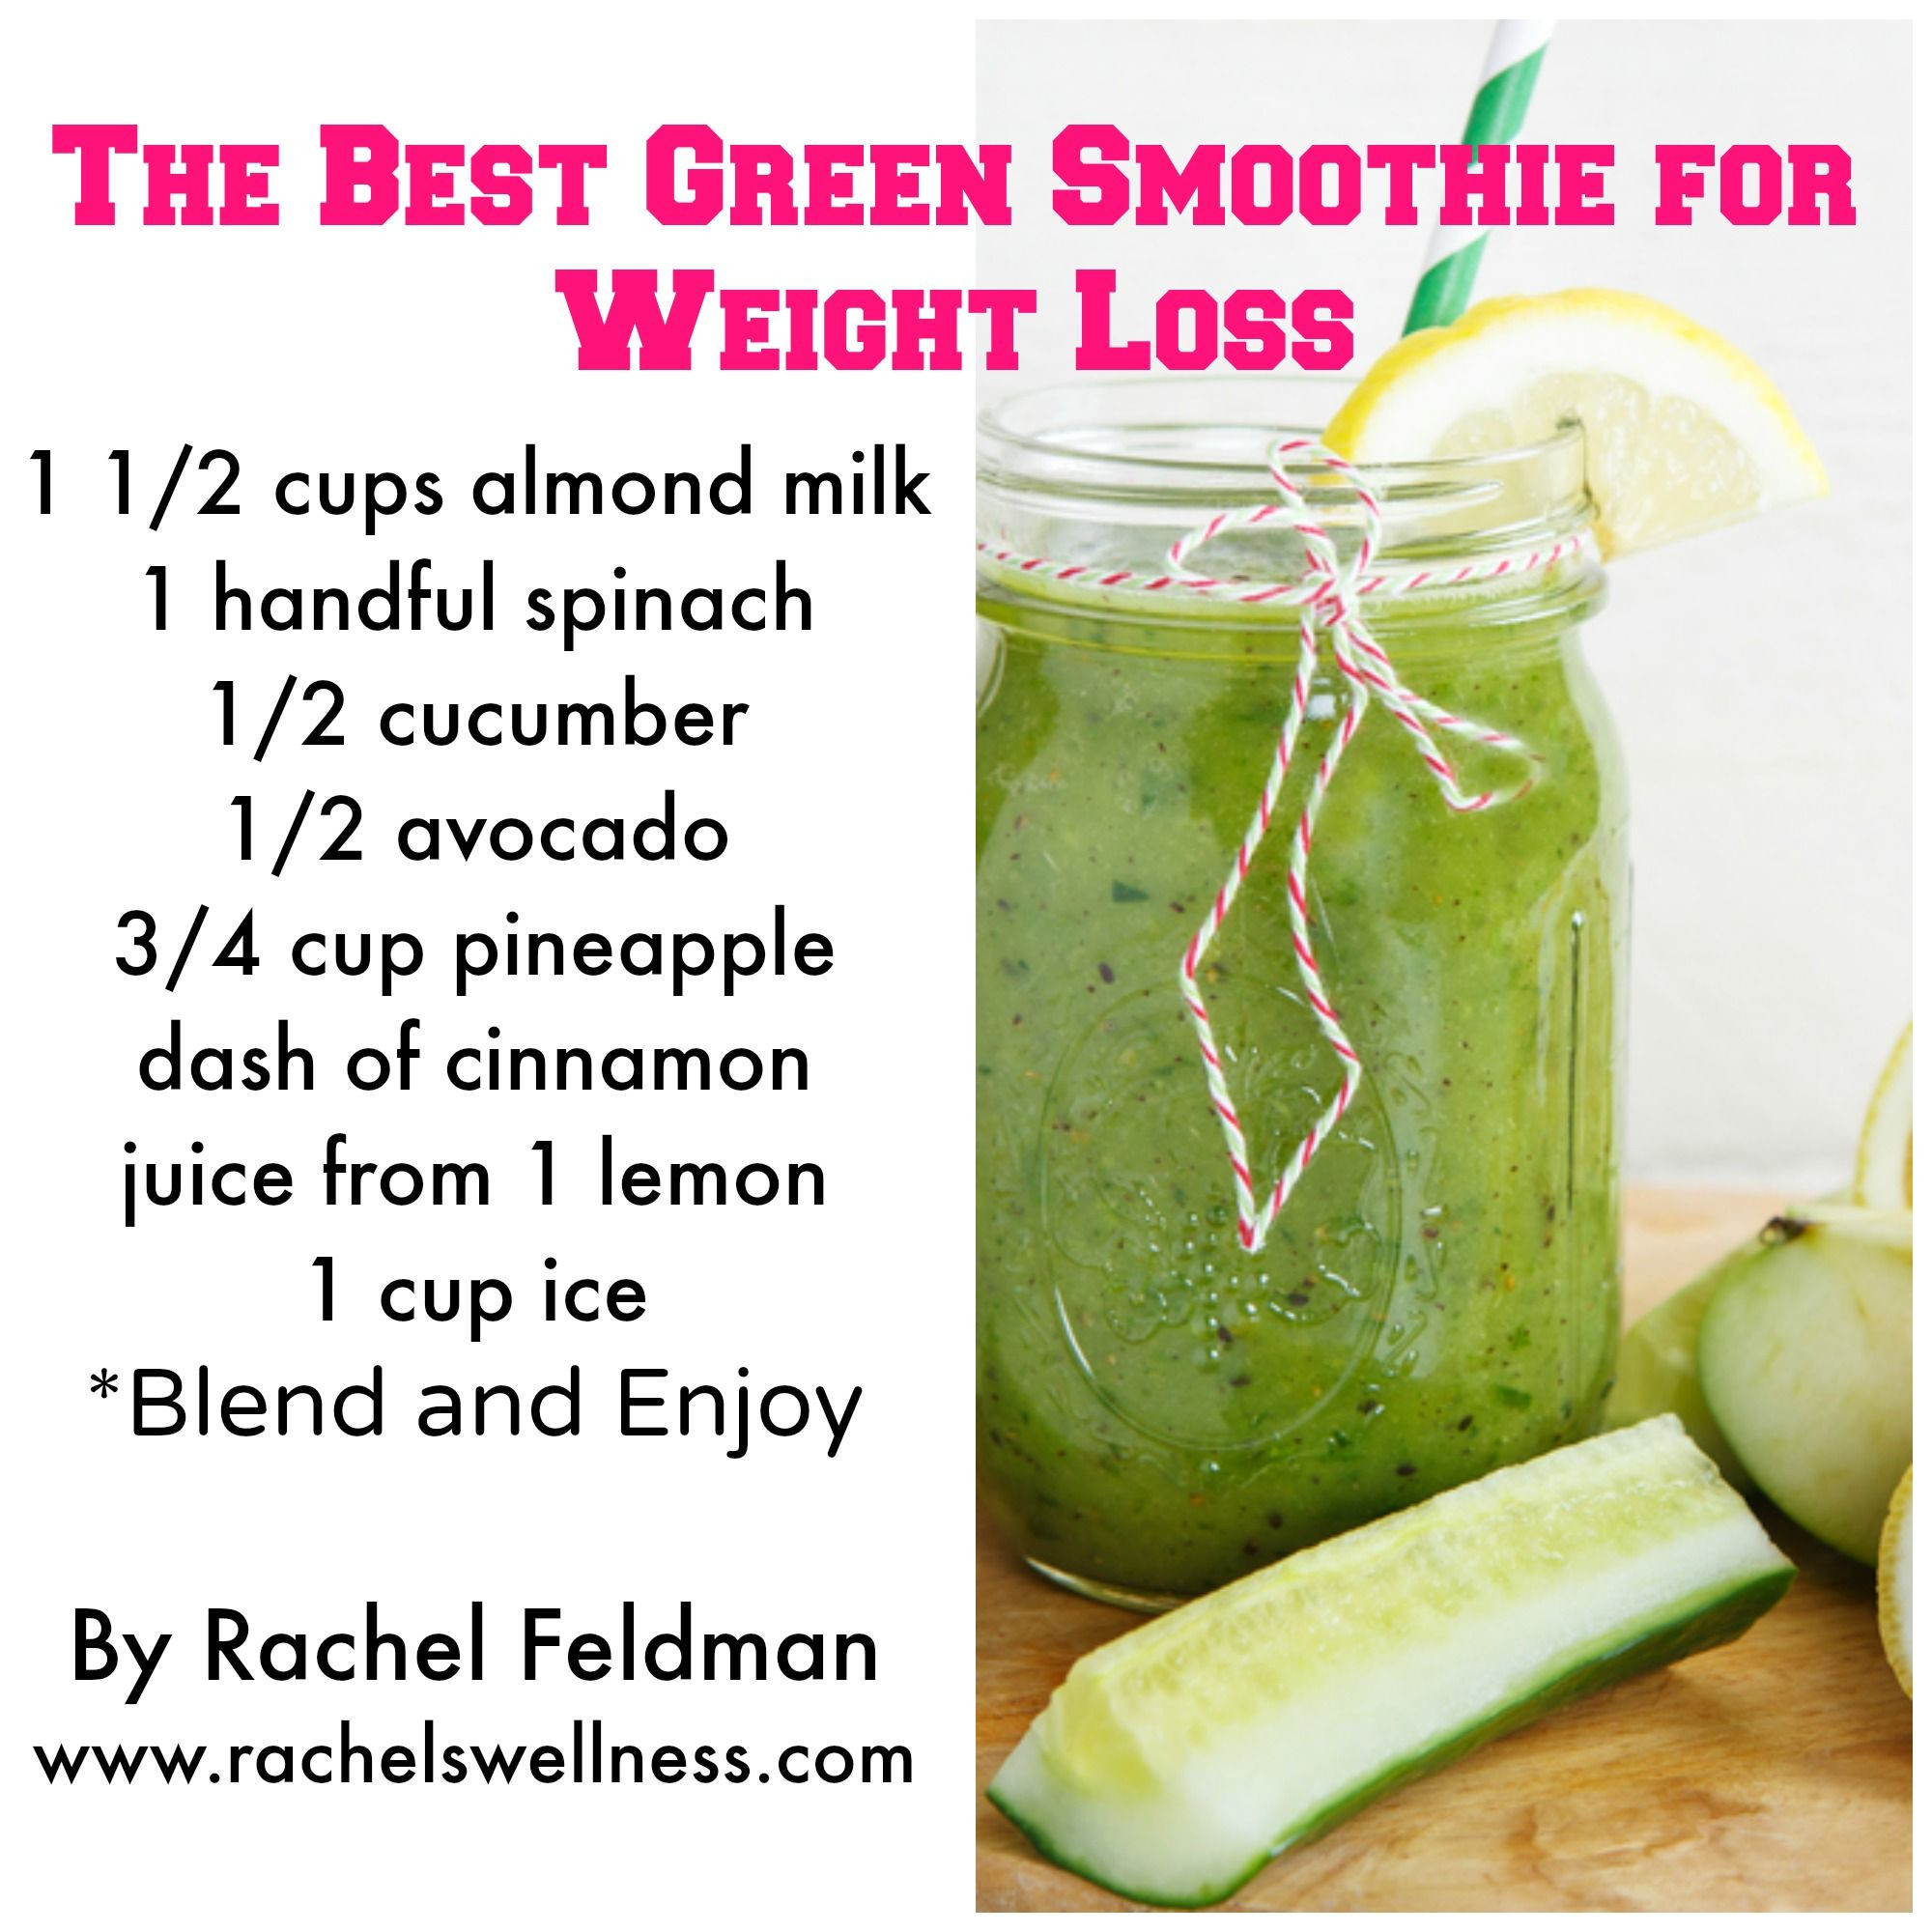 Green Weight Loss Smoothie Recipes
 7 Healthy Green Smoothie Recipes For Weight Loss